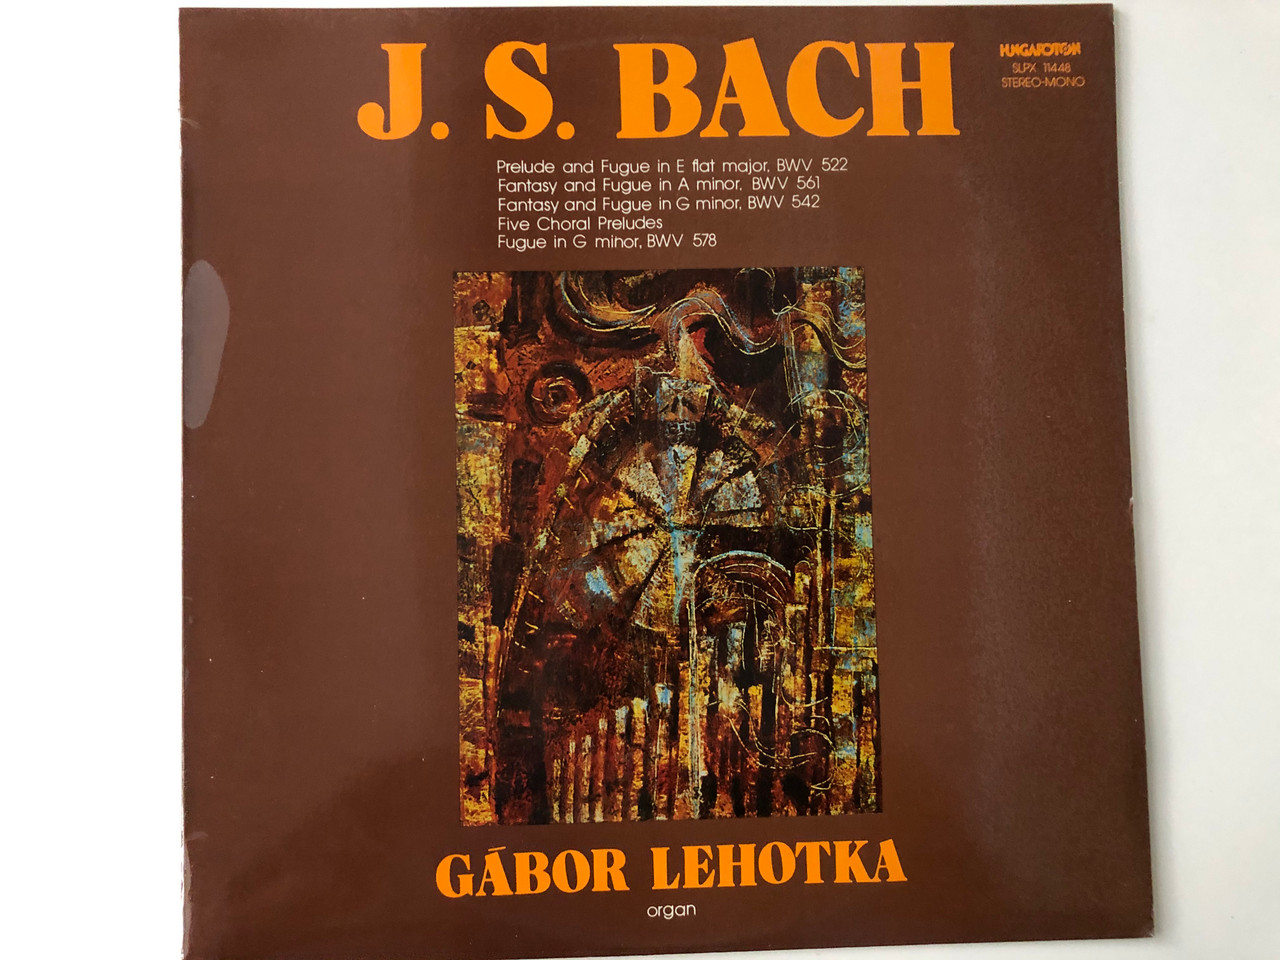 https://cdn10.bigcommerce.com/s-62bdpkt7pb/products/29967/images/178111/J._S._Bach_-_Prelude_And_Fugue_In_E_flat_major_BWV._552_Fantasy_And_Fugue_In_A_minor_BWV._561_Fantasy_And_Fugue_In_G_minor_BWV._542_Five_Choral_Preludes_Fugue_In_G_minor_BWV._578_Gb_1__80479.1620835884.1280.1280.JPG?c=2&_ga=2.8920759.305117247.1620828817-17914180.1620828817